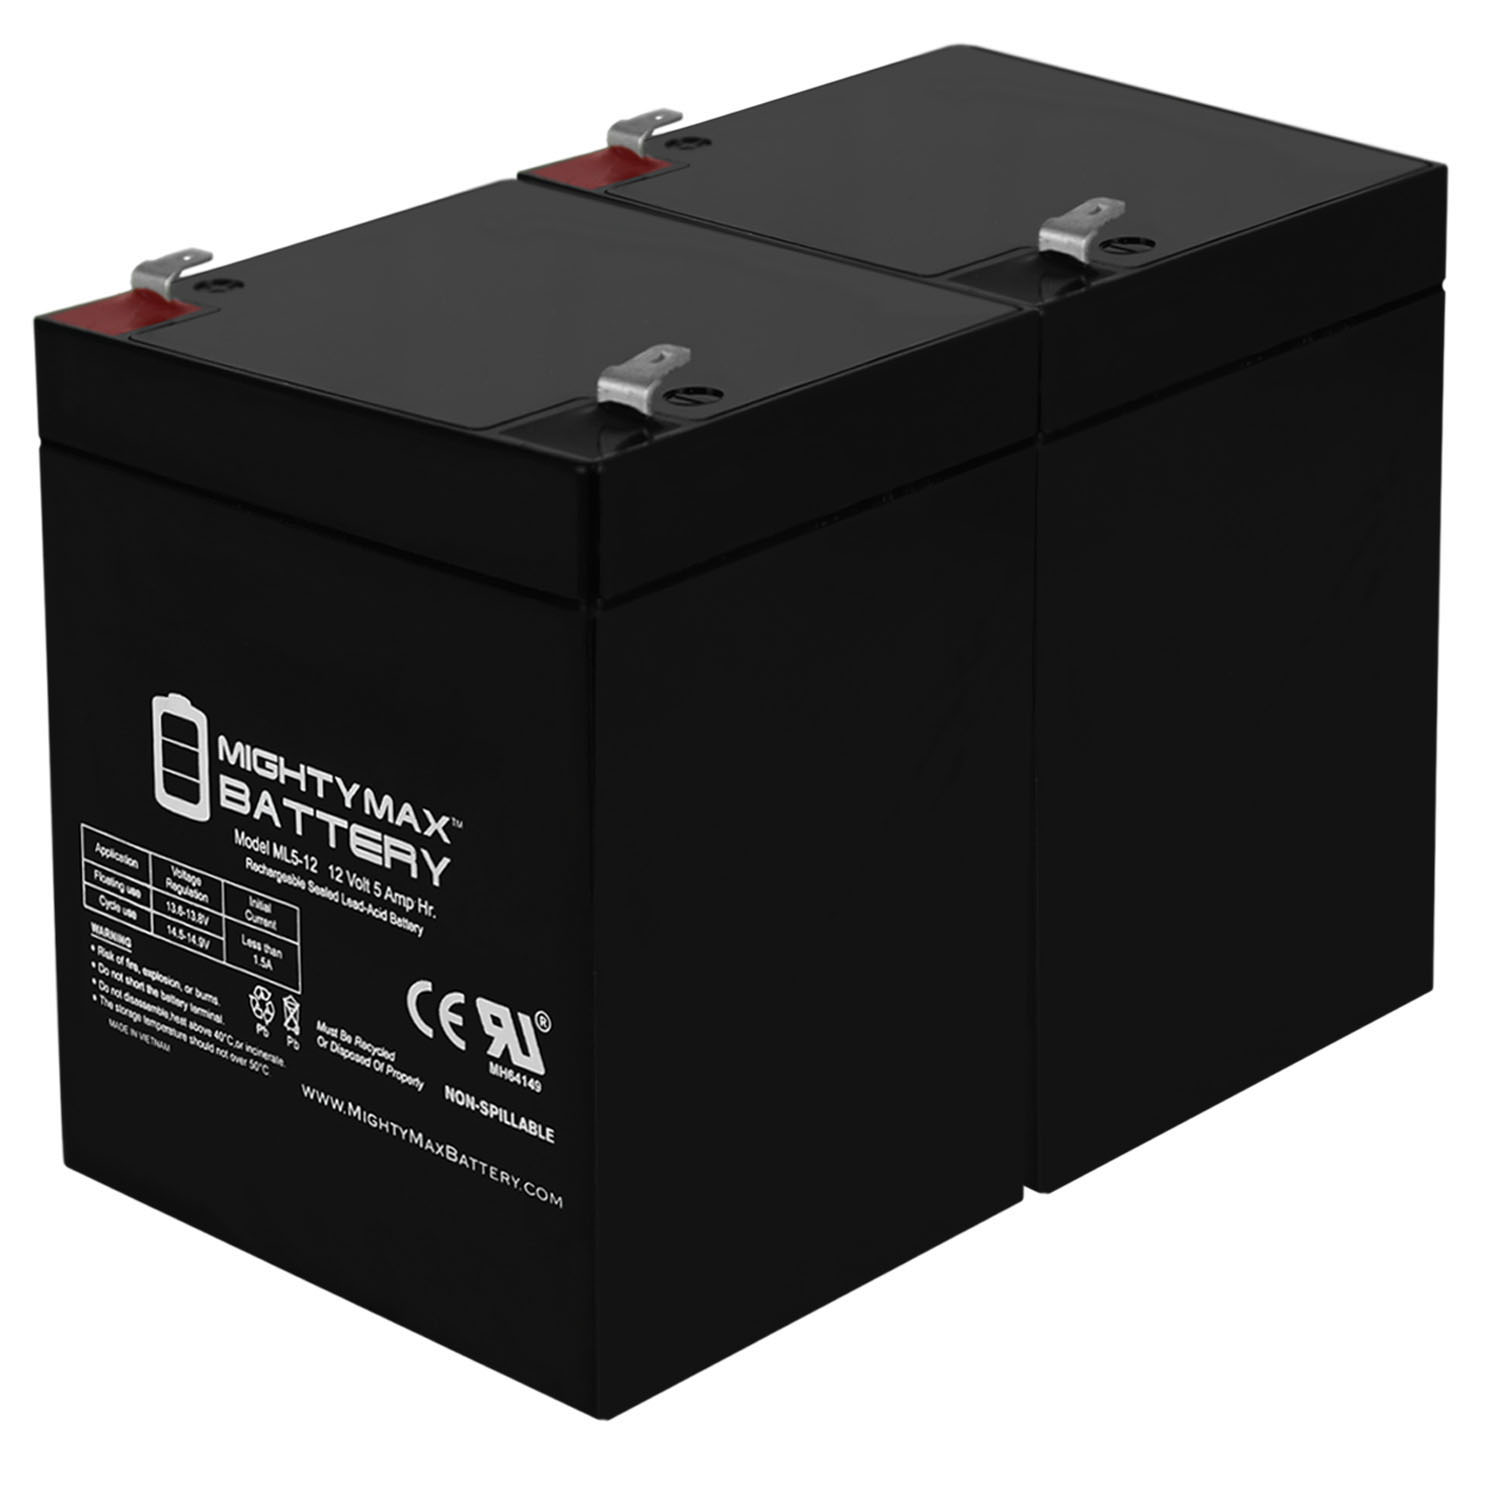 12V 5AH SLA Replacement Battery for E-Scooter 24 - 2 Pack